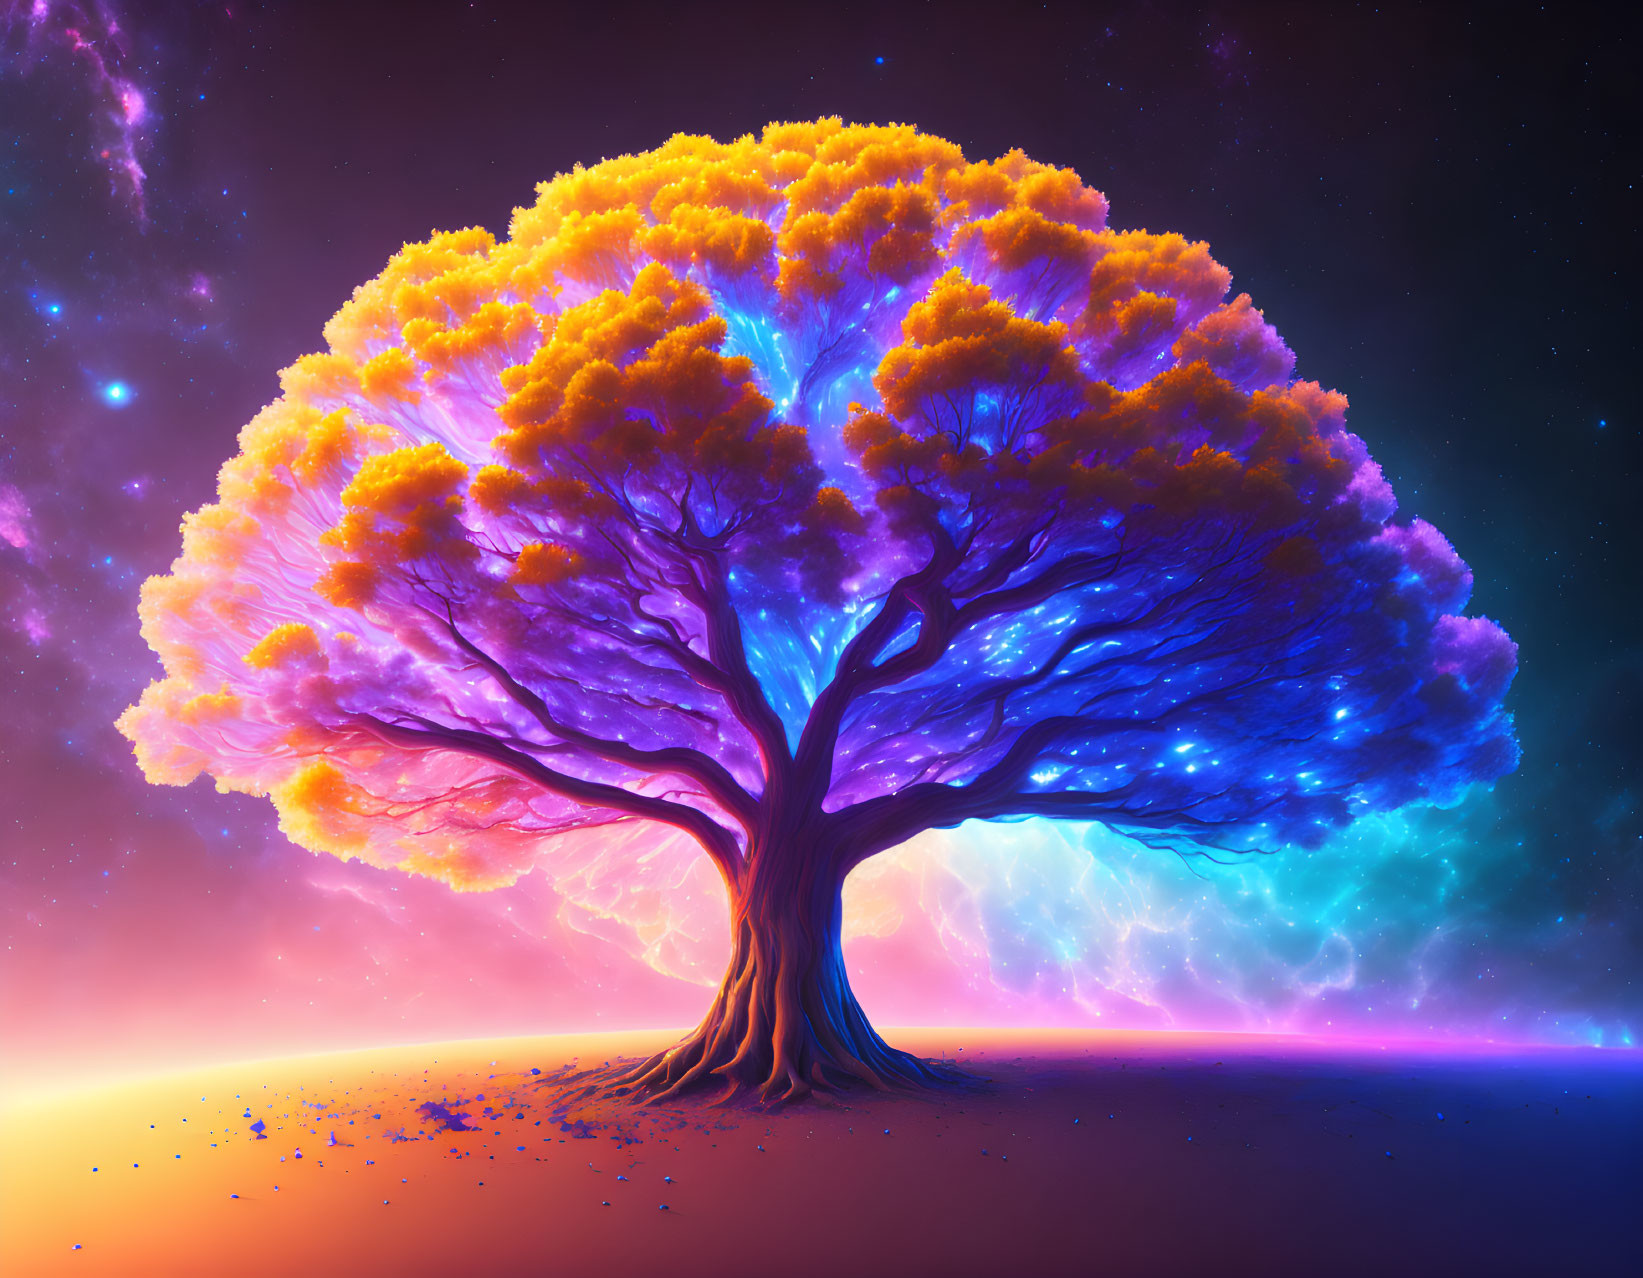 Colorful Tree Illustration with Rainbow Night Sky and Contrasting Warm Orange Leaves & Cool Blue Trunk